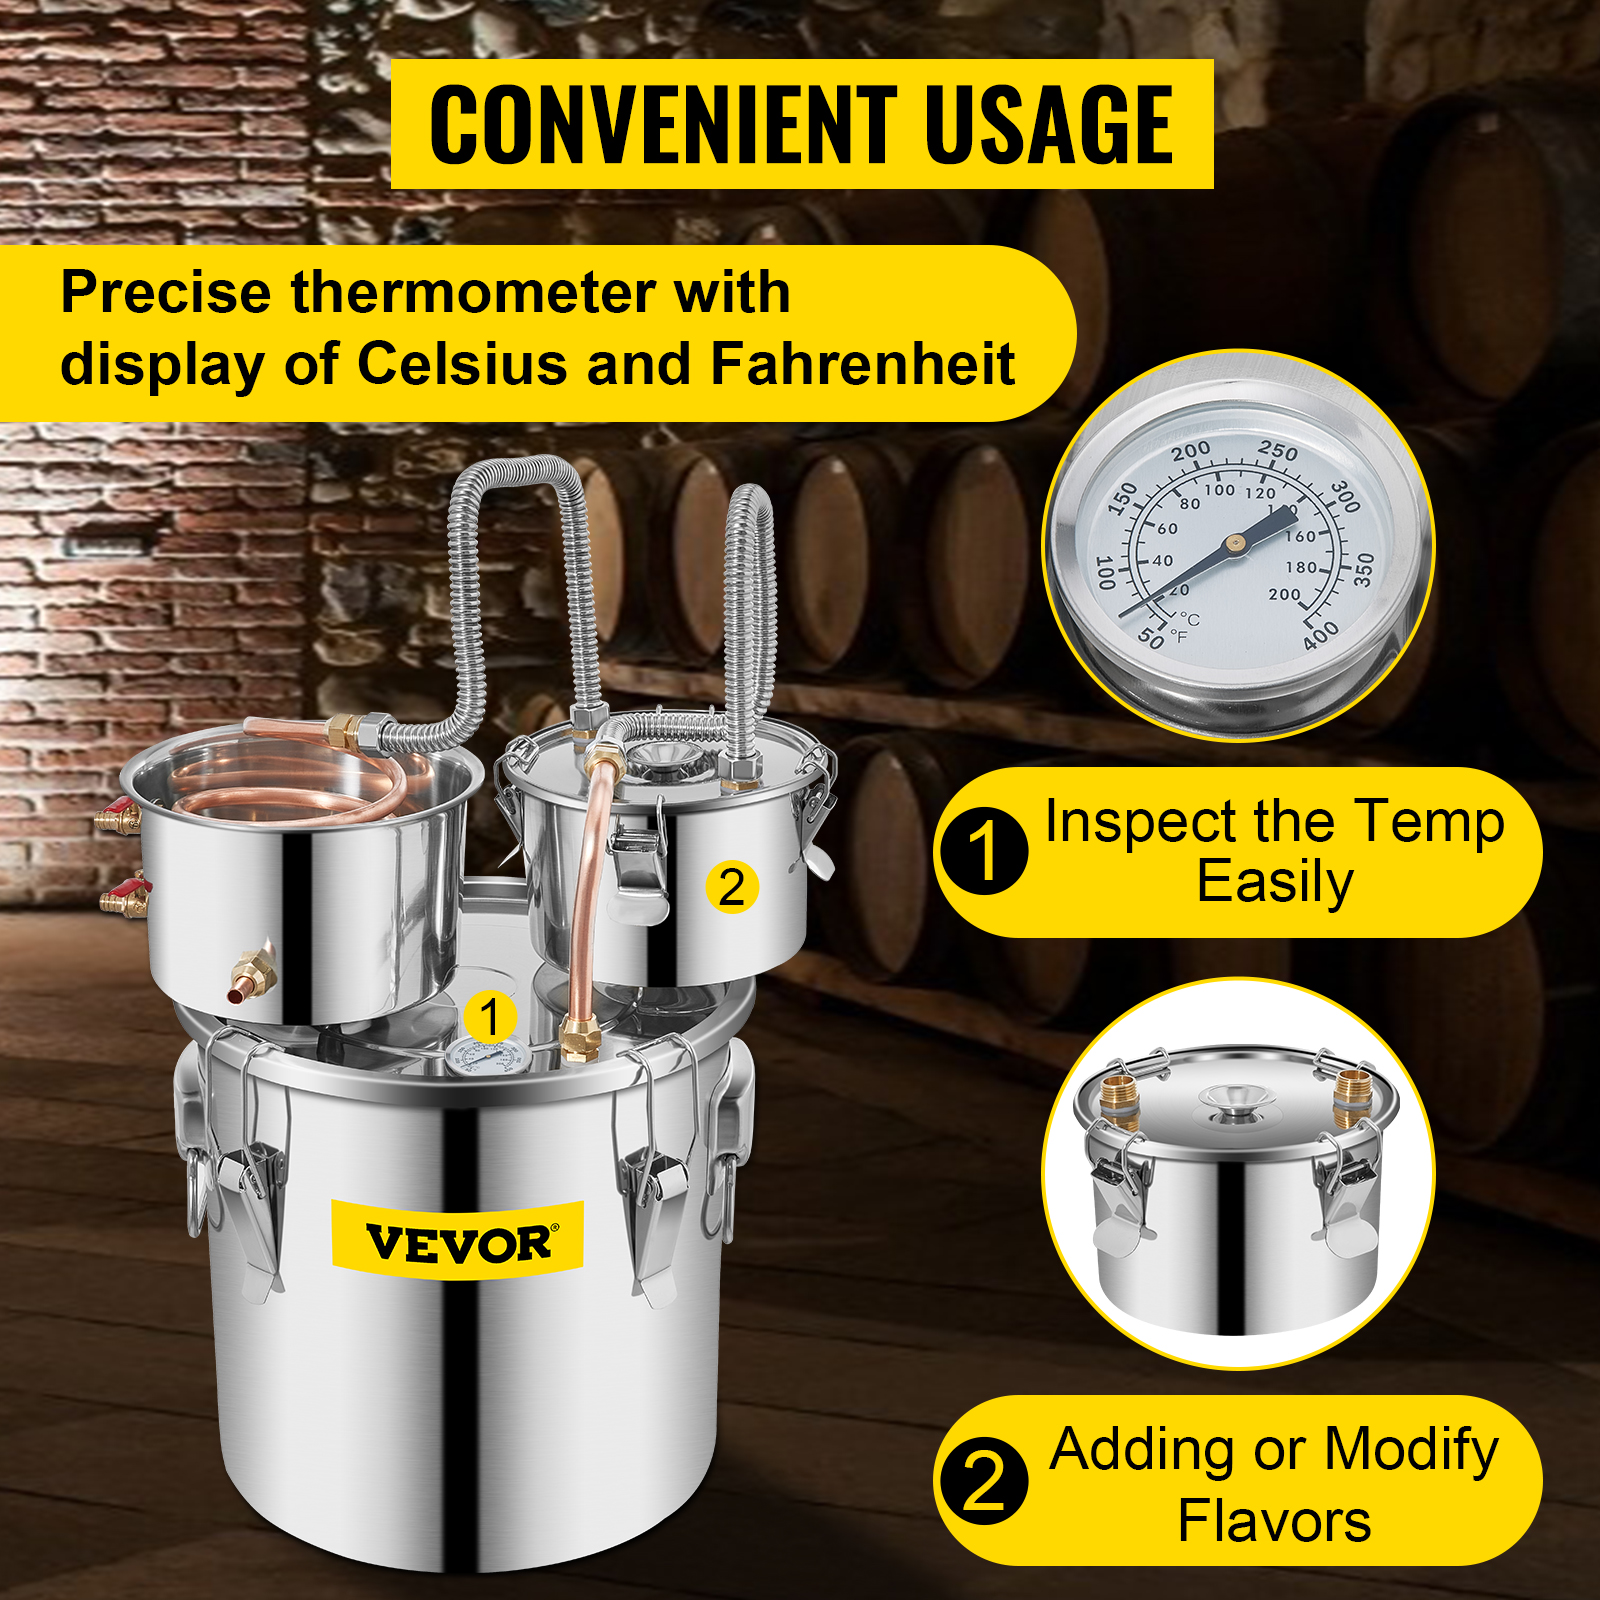 VEVOR Alcohol Still Gal 19L Water Alcohol Distiller Copper Tube With  Circulating Pump Home Brewing Kit Build-in Thermometer for DIY Whisky Wine  Brandy, Stainless Steel, Pots VEVOR US